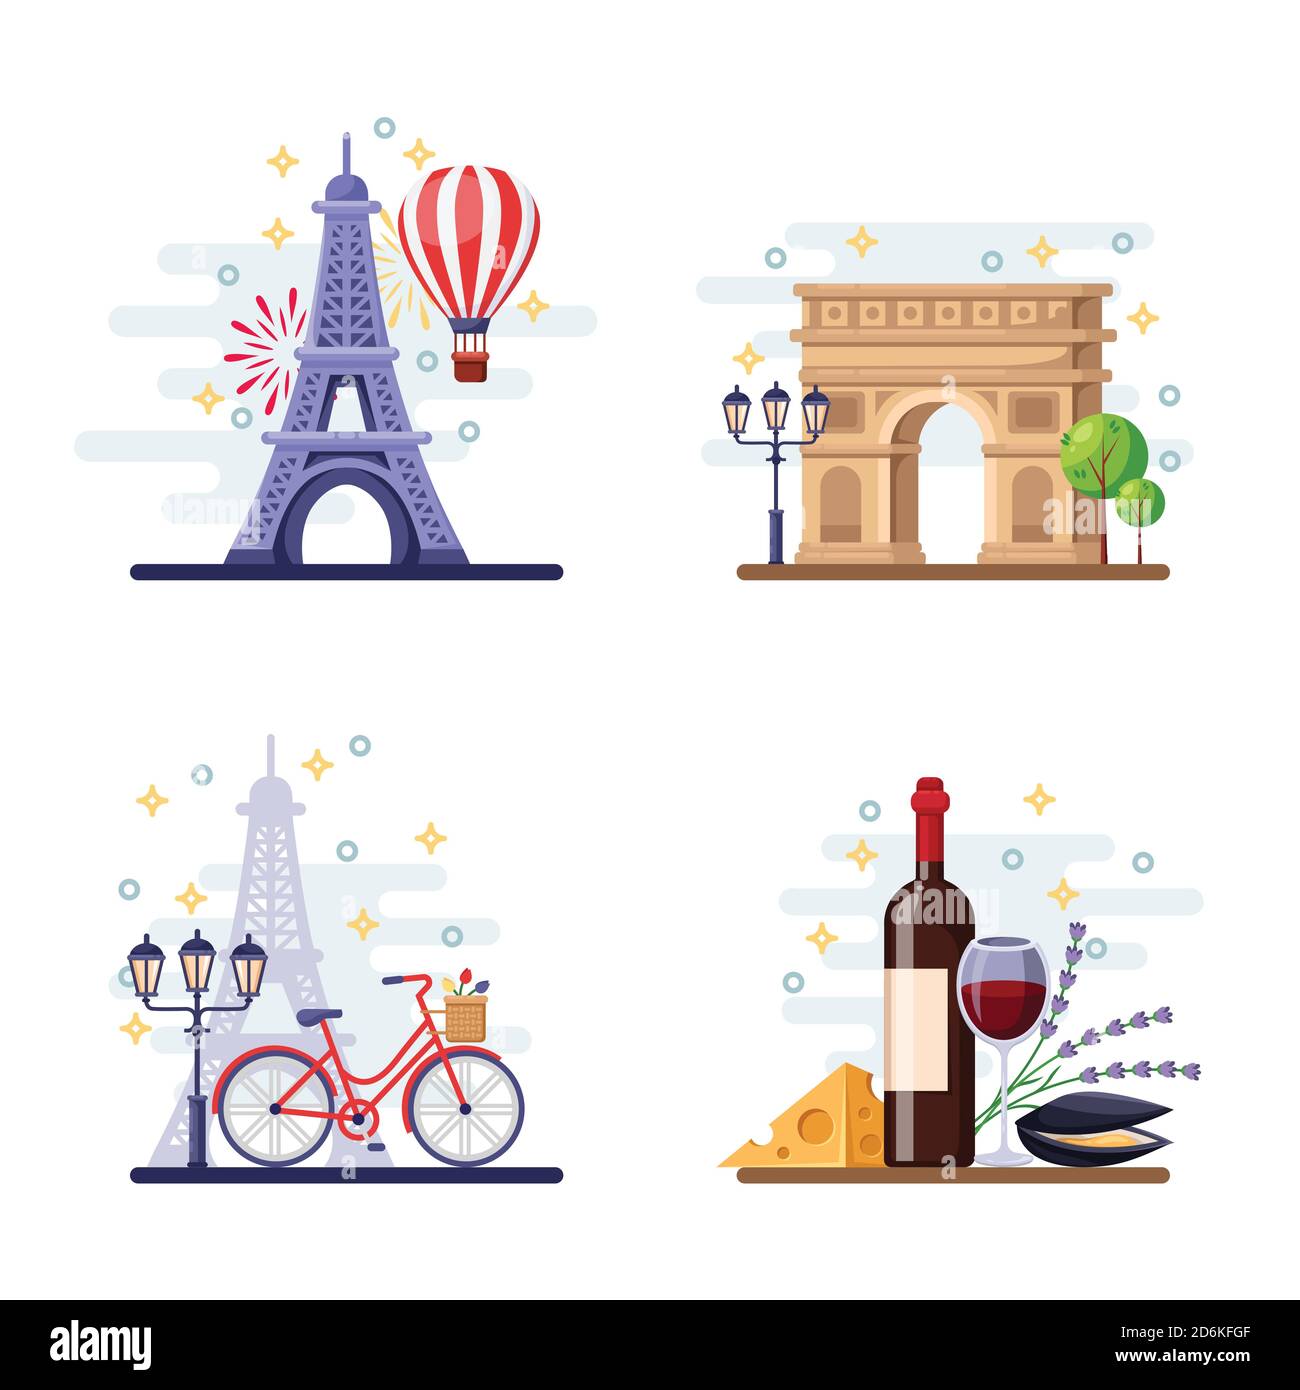 Travel to Paris vector flat illustration. City symbols, landmarks and food. France icons and design elements. Stock Vector